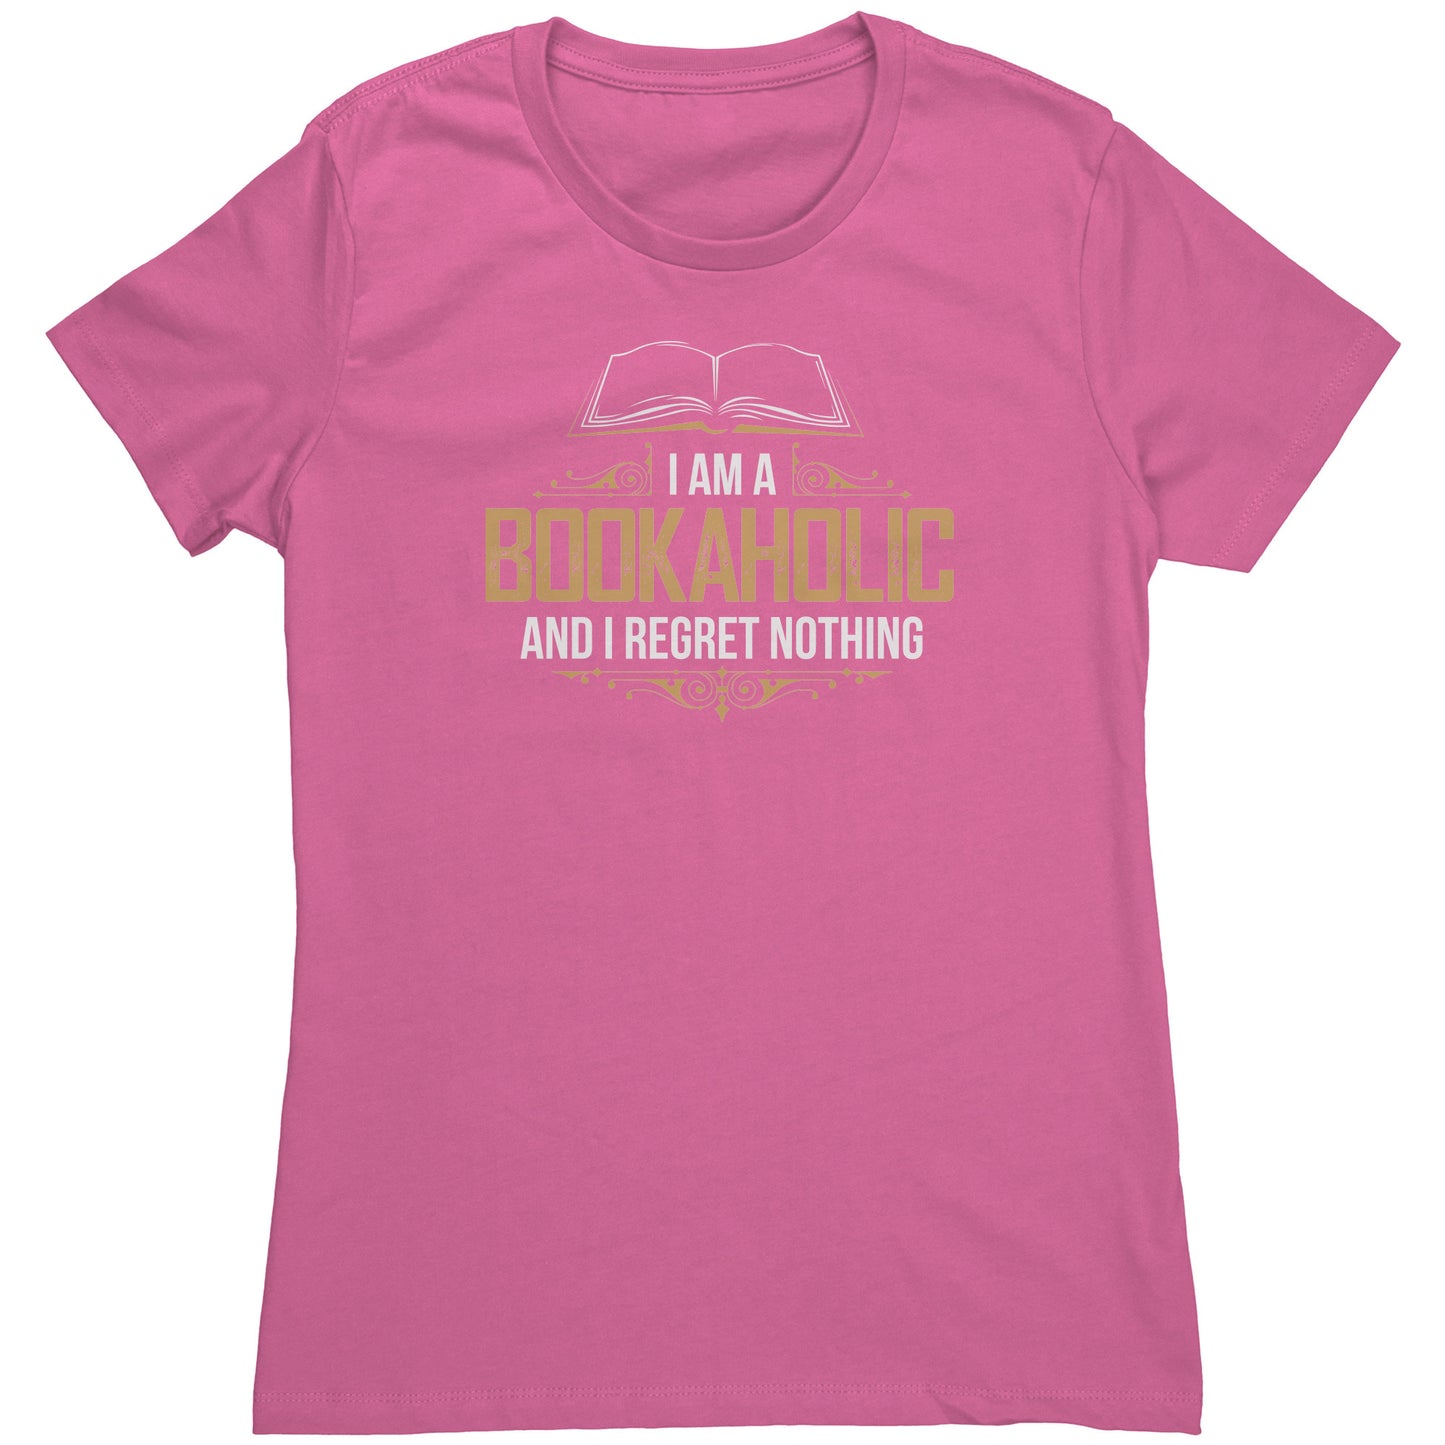 I Am A Bookaholic And I Regret Nothing | Women's T-Shirt